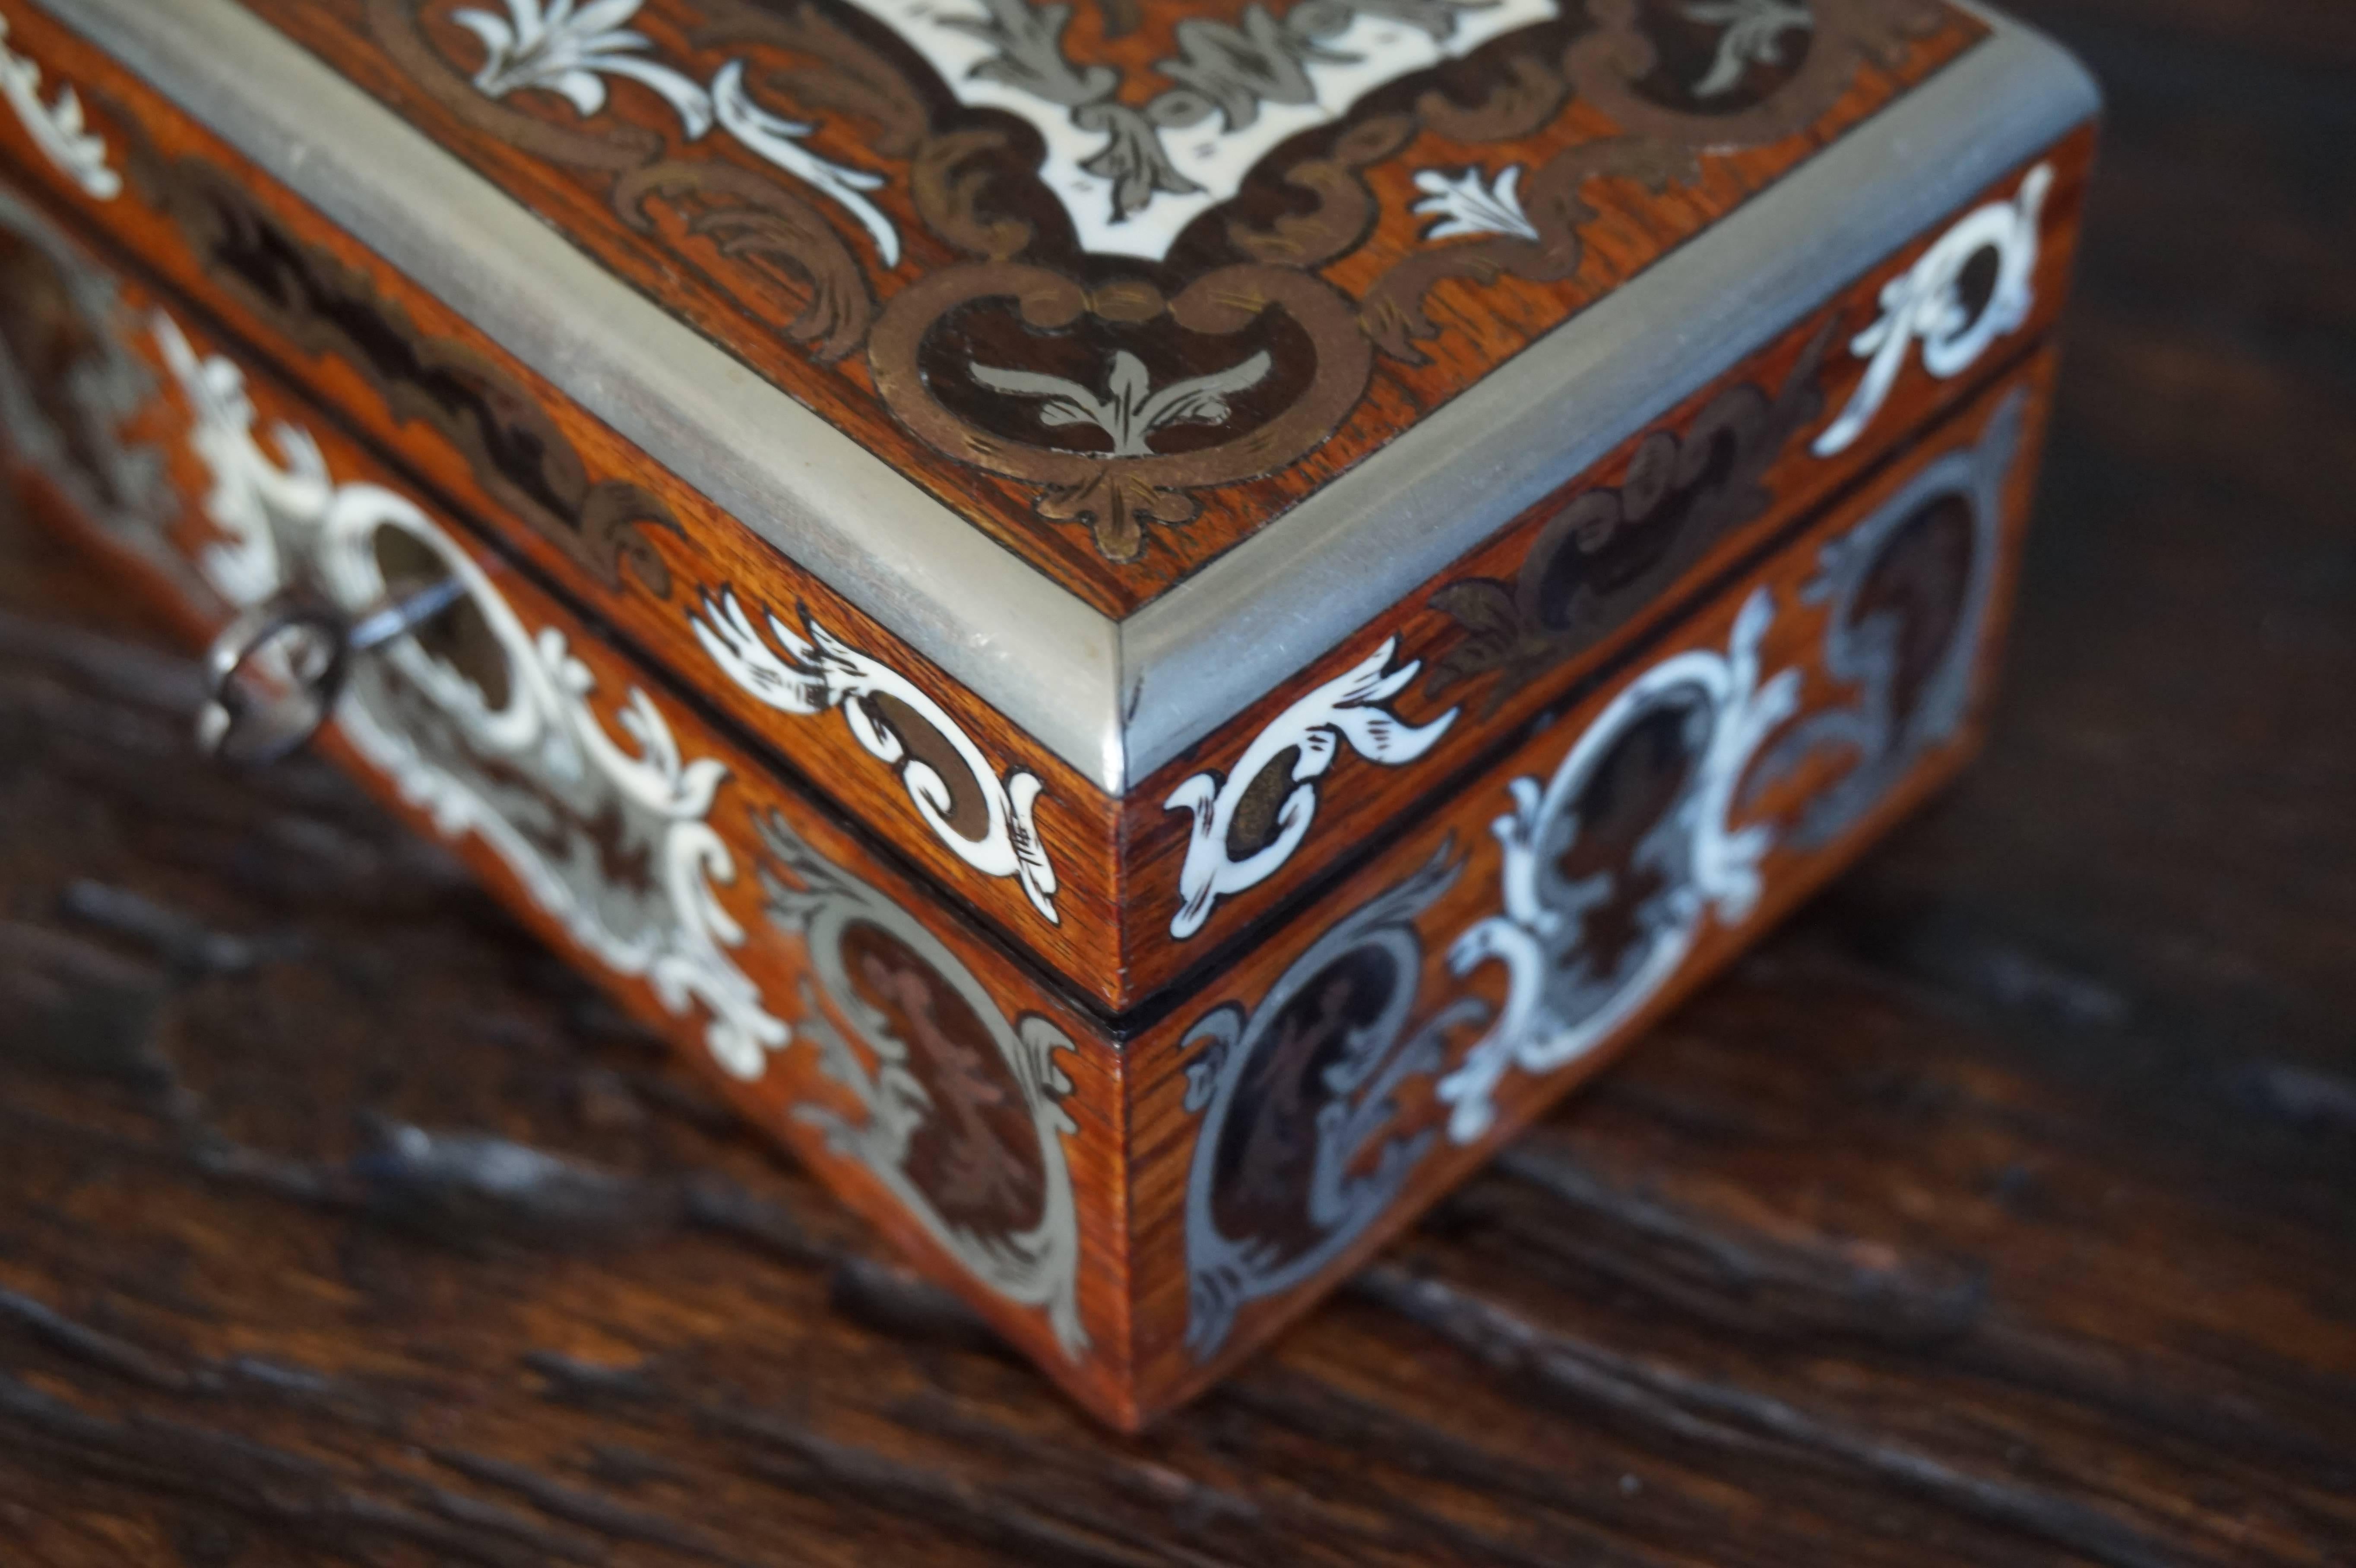 Inlay Stunning Antique Box Inlaid with Amazing Motifs in Silver, Bone, Mother-of-Pearl